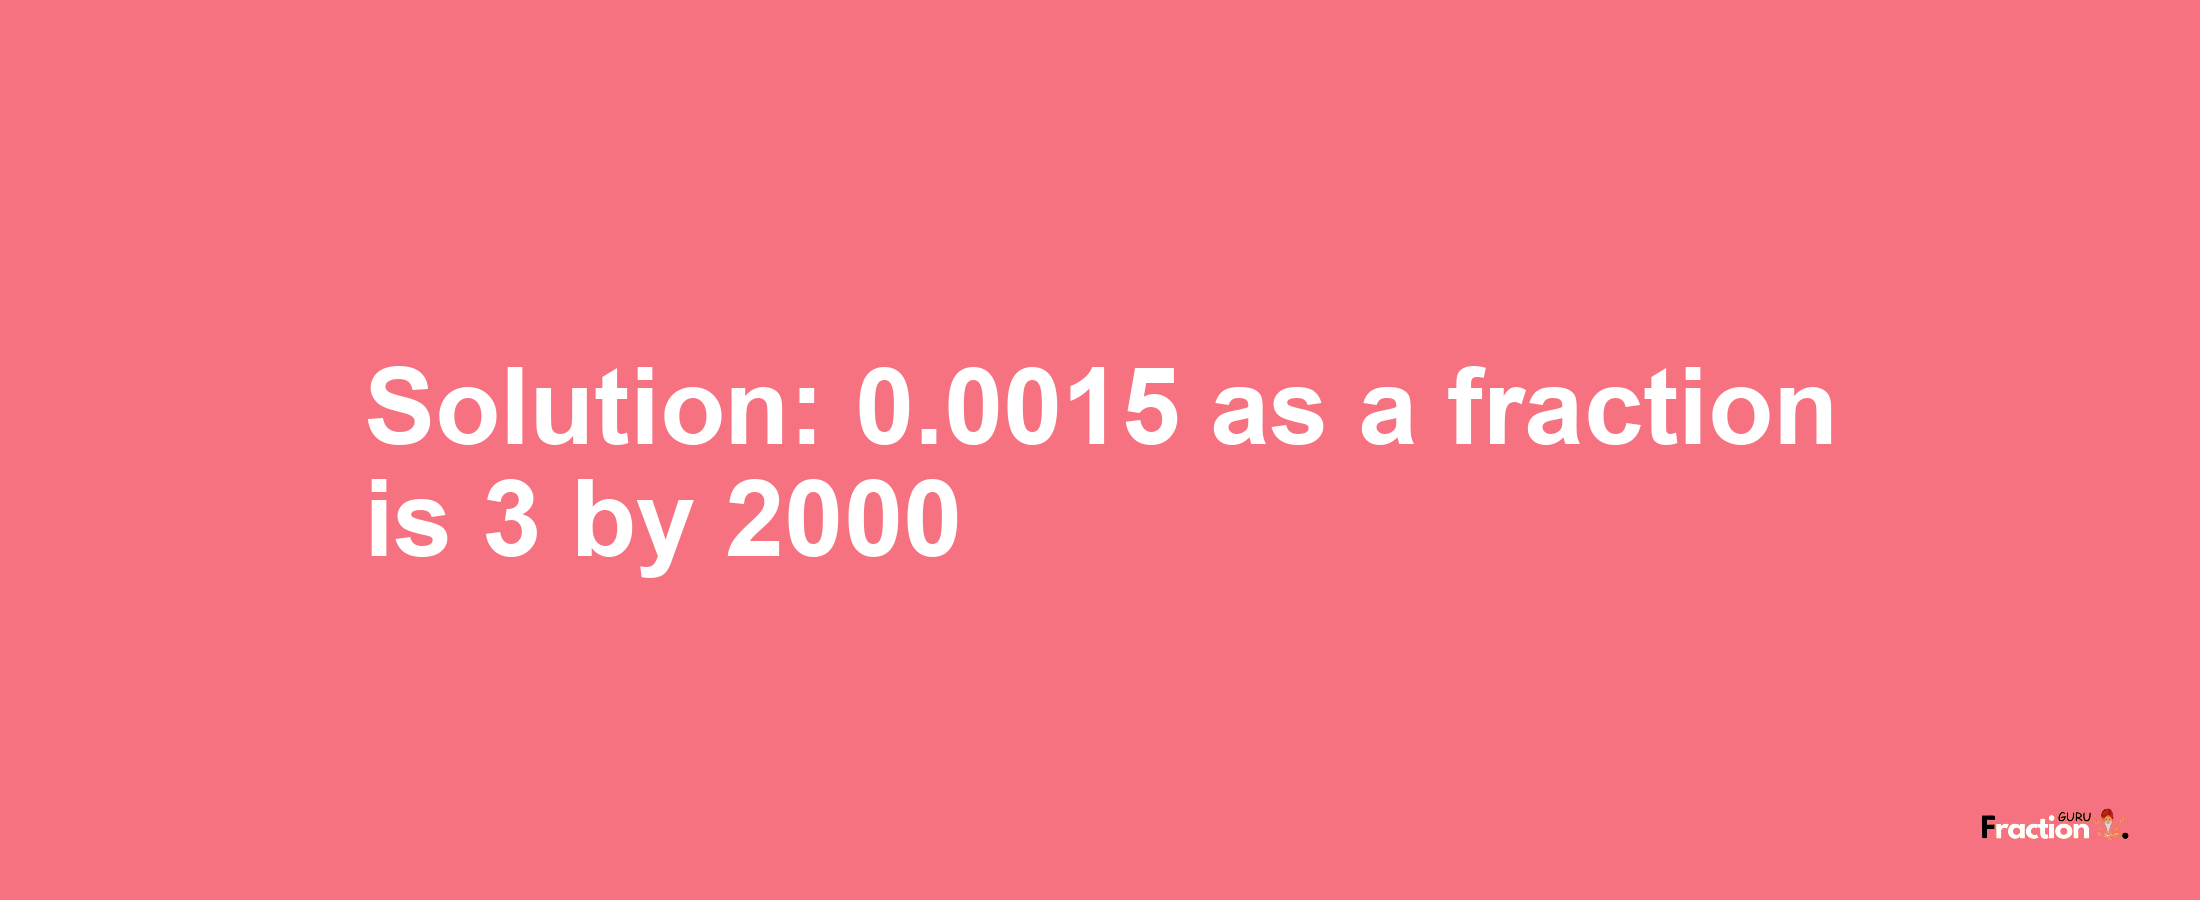 Solution:0.0015 as a fraction is 3/2000